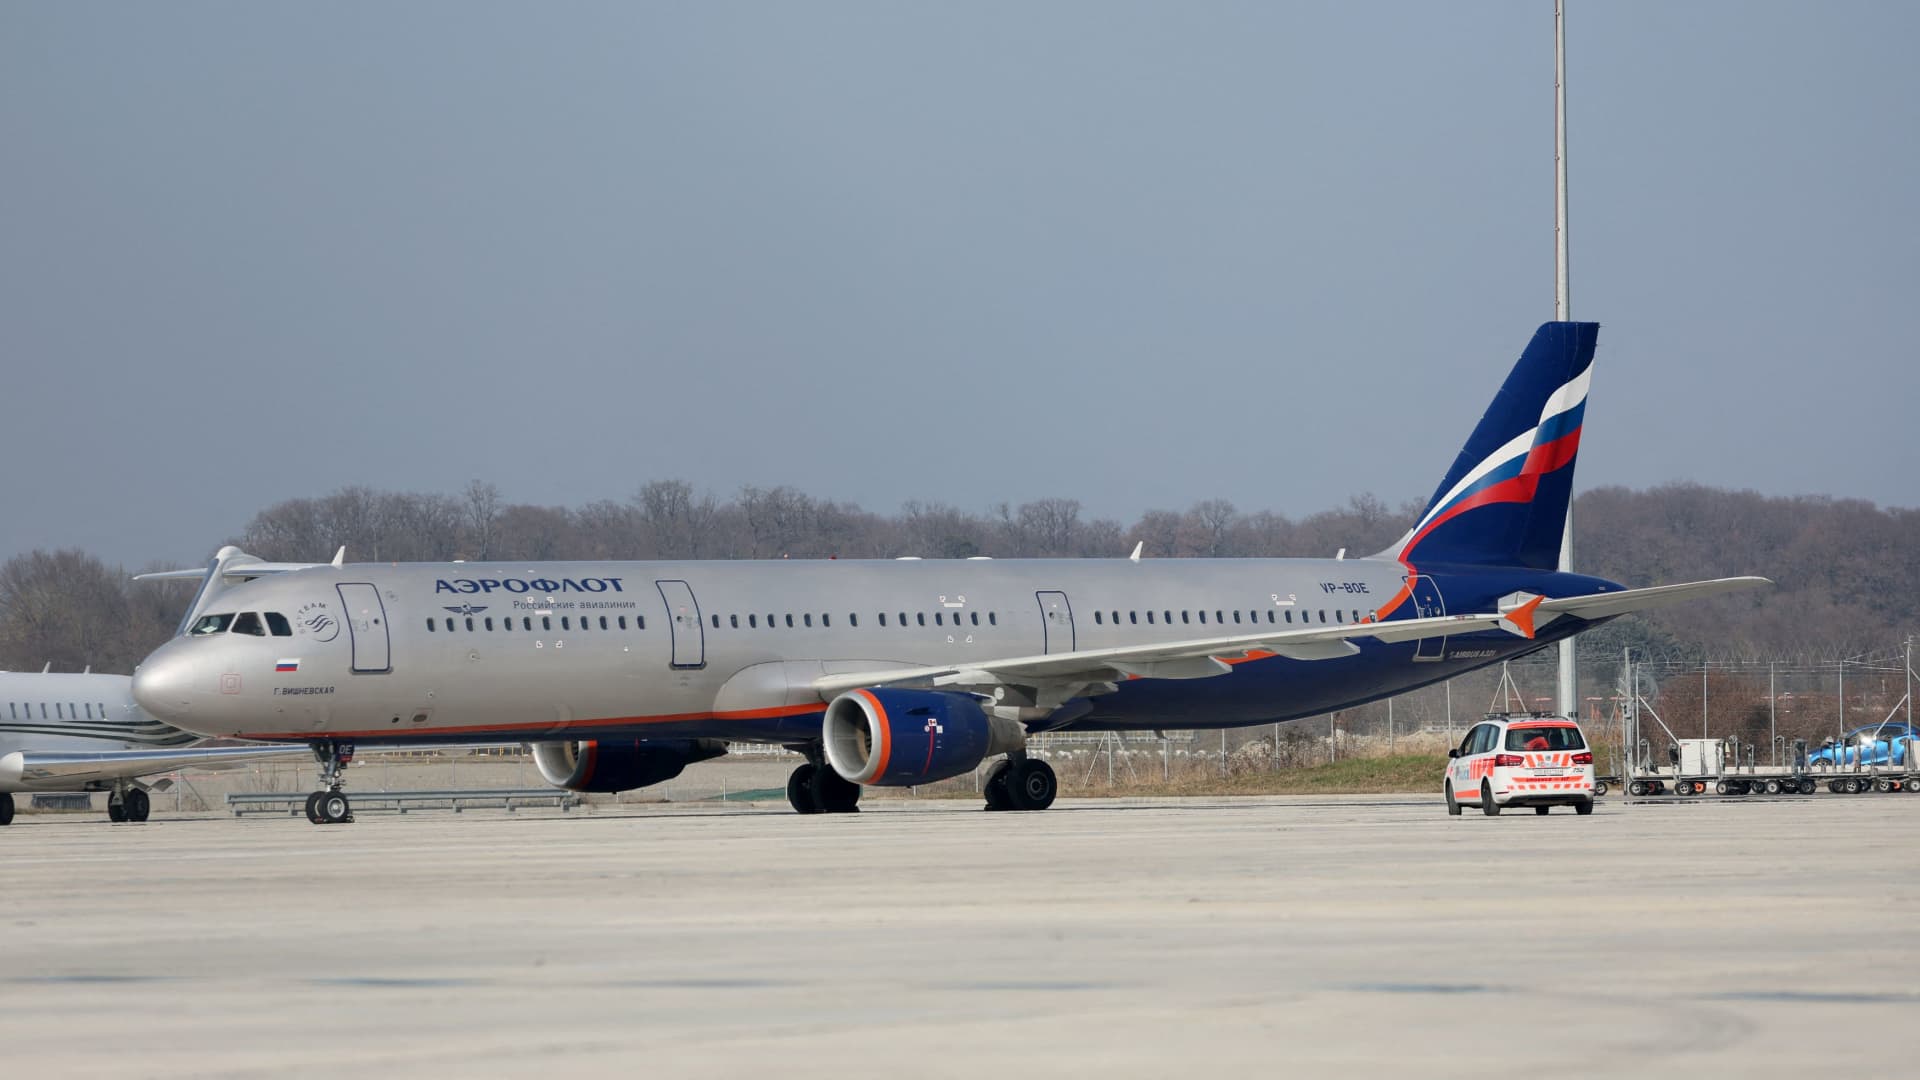 Aircraft leasing giant casts doubt on renting to Russian airlines again after Putin seizes planes